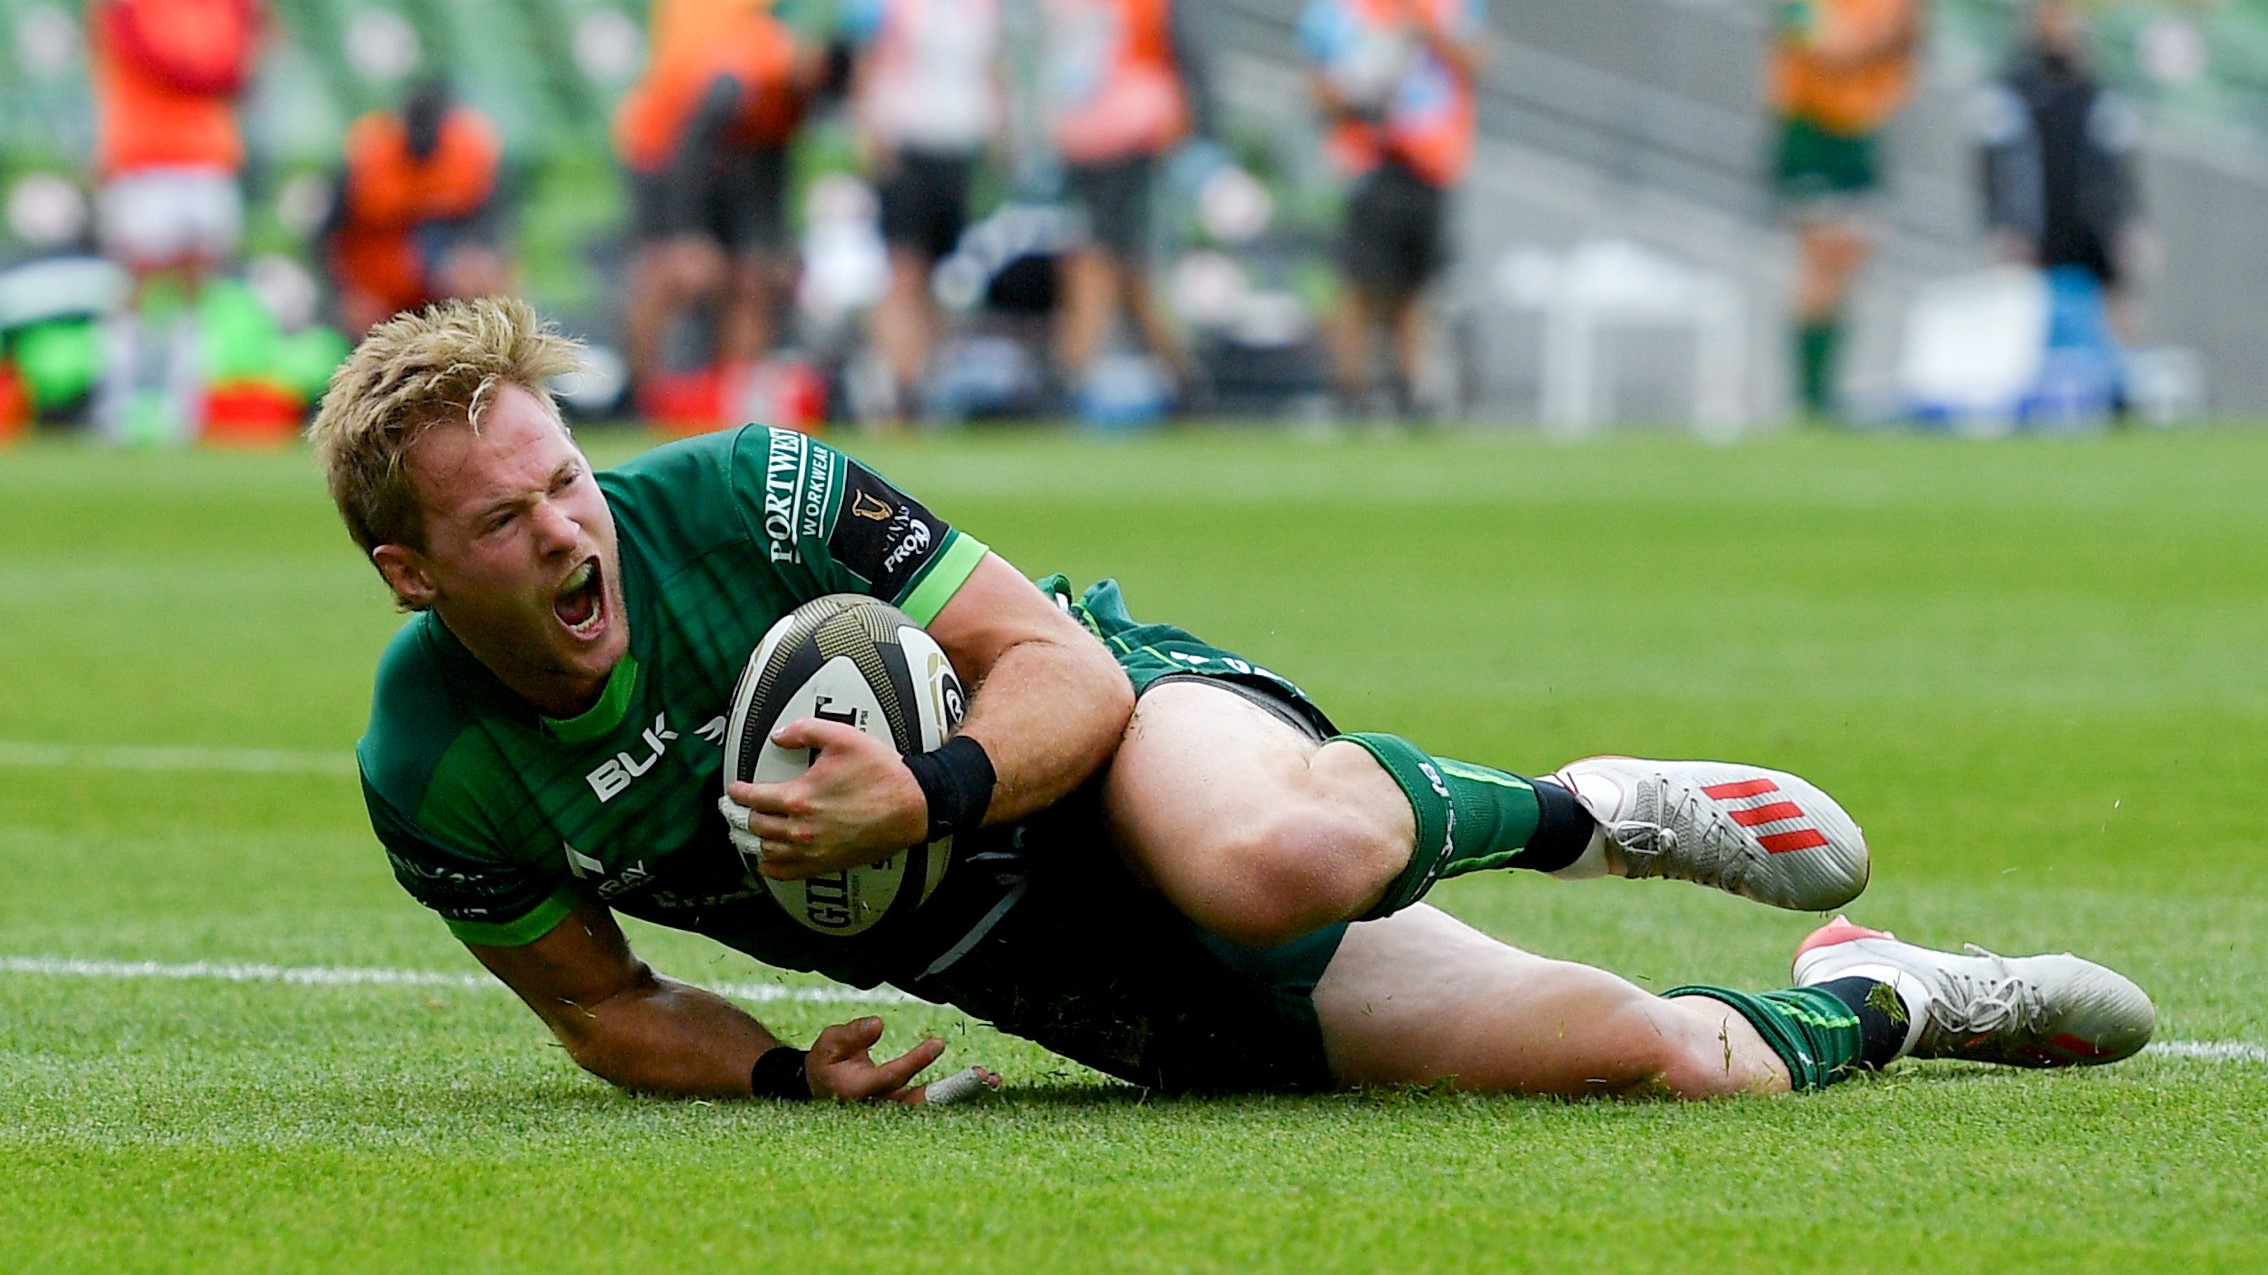 Munster vs Connacht live stream how to watch Pro14 rugby online from anywhere TechRadar